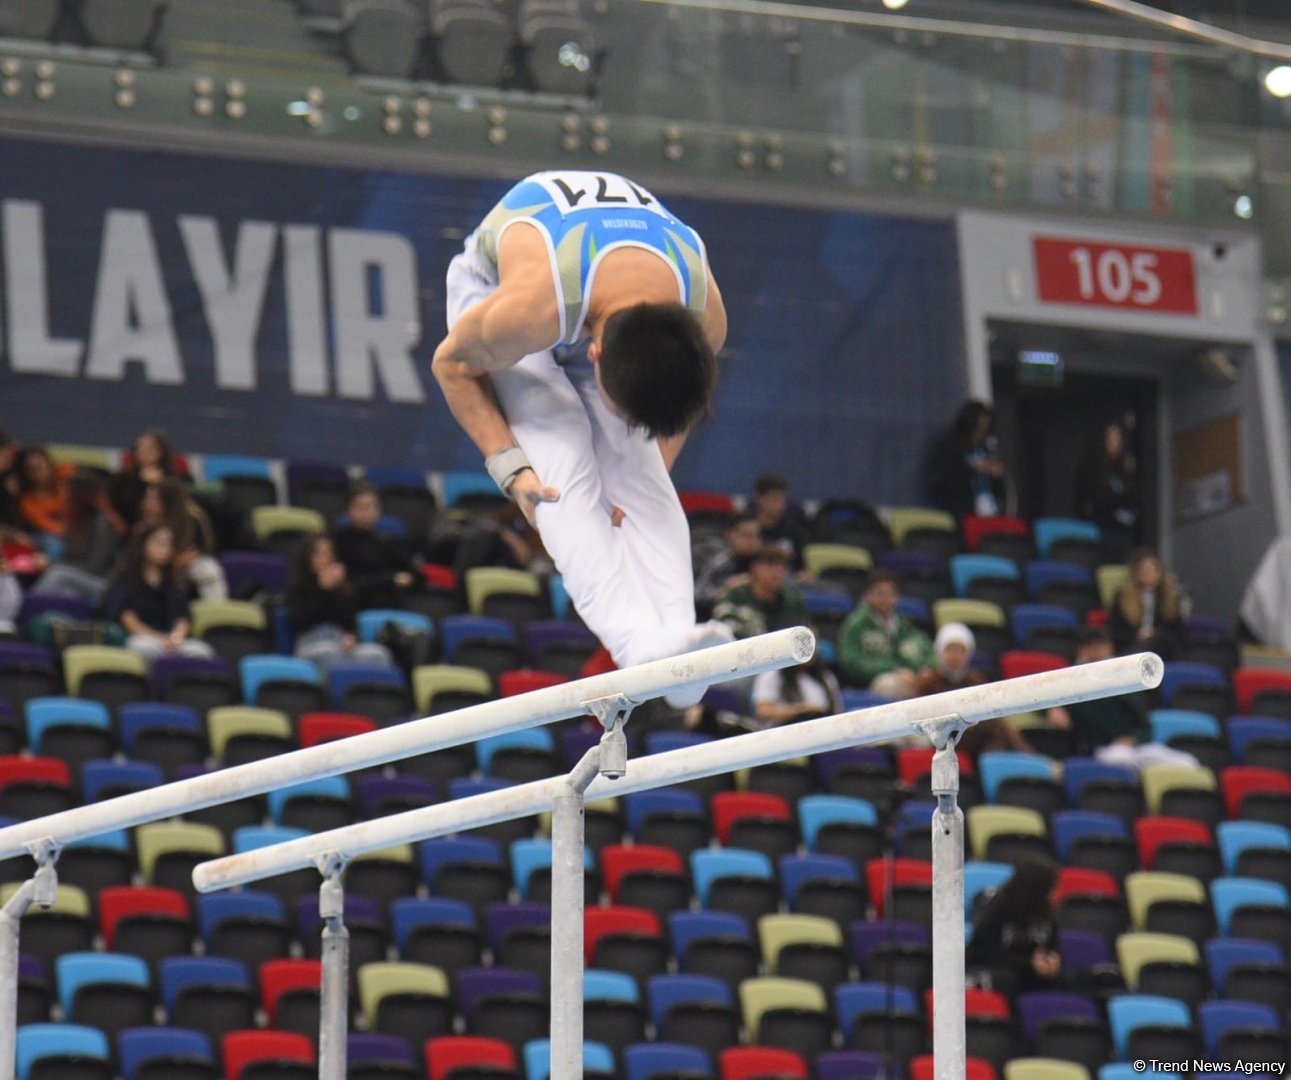 AGF Trophy Int'l Tournament in Artistic Gymnastics contests kick off in Baku (PHOTO)